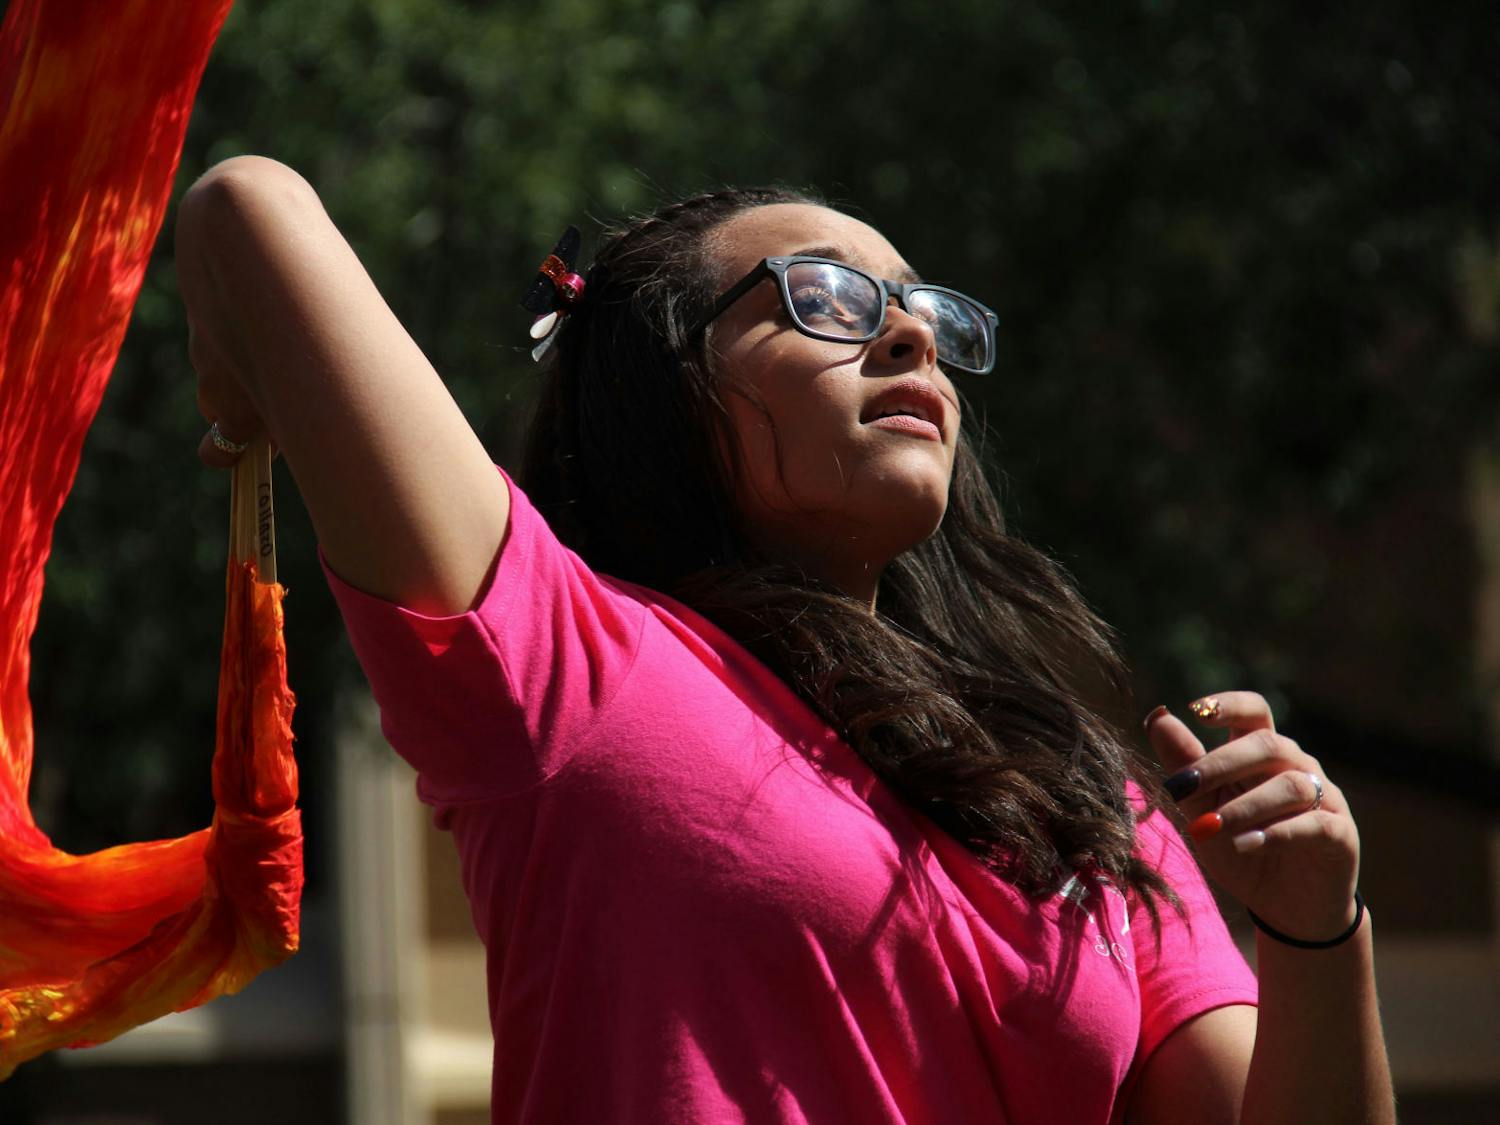 Carla Collazo, a 16-year-old from Puerto Rico, leads her veiled-fan dance group for Iglesia Casa Del Alfarero, or Potter's House Church, during the Downtown Latino Festival in Bo Diddley Plaza Saturday afternoon.
&nbsp;